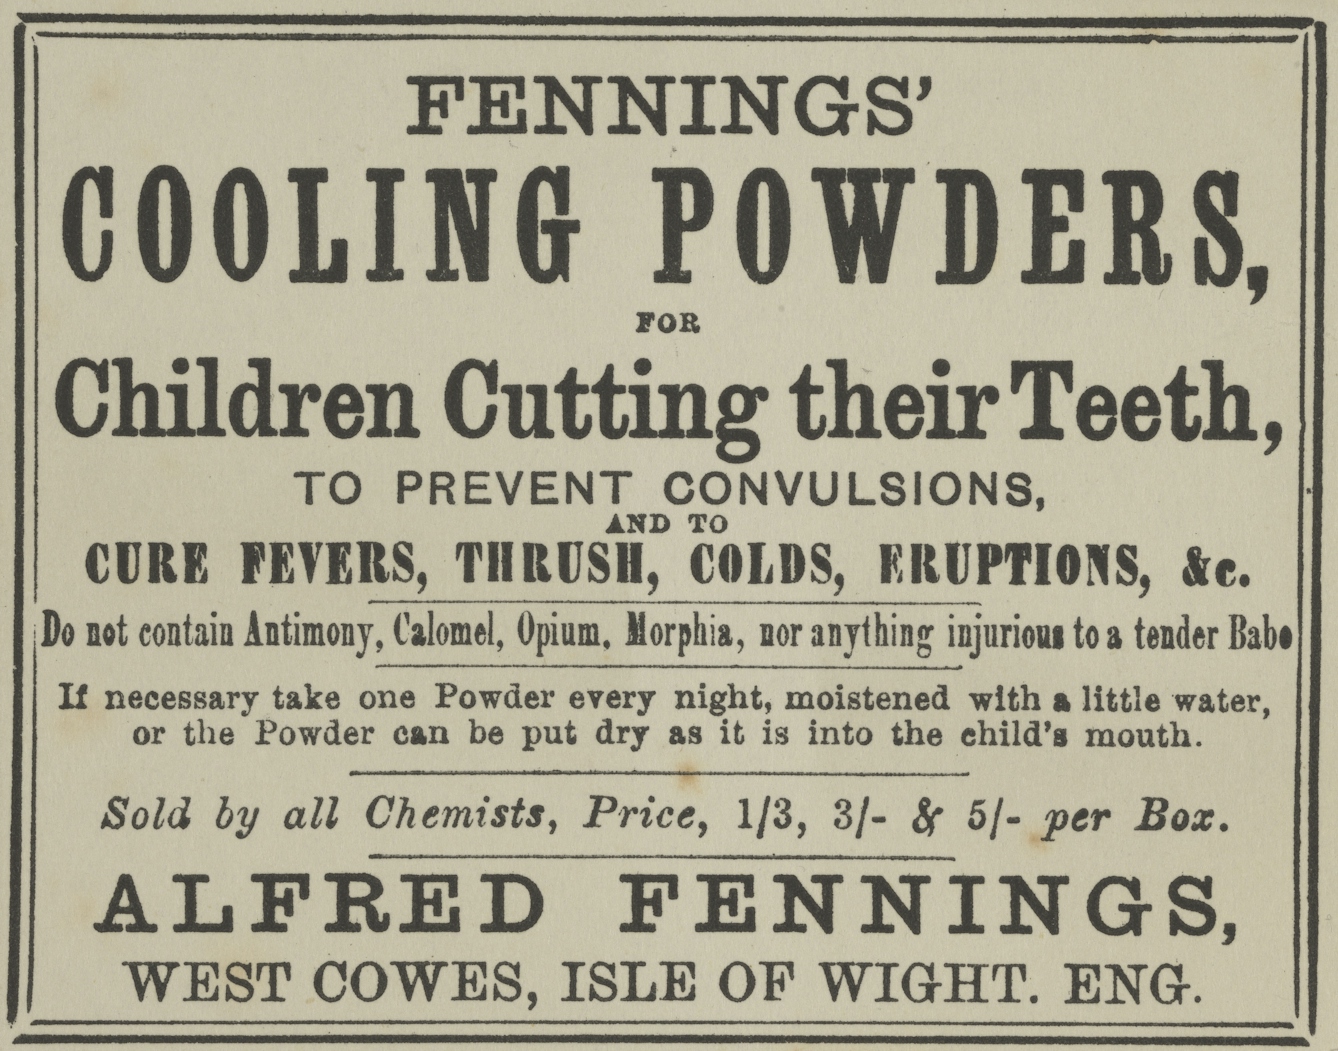 Advert for Fennings' Cooling Powders